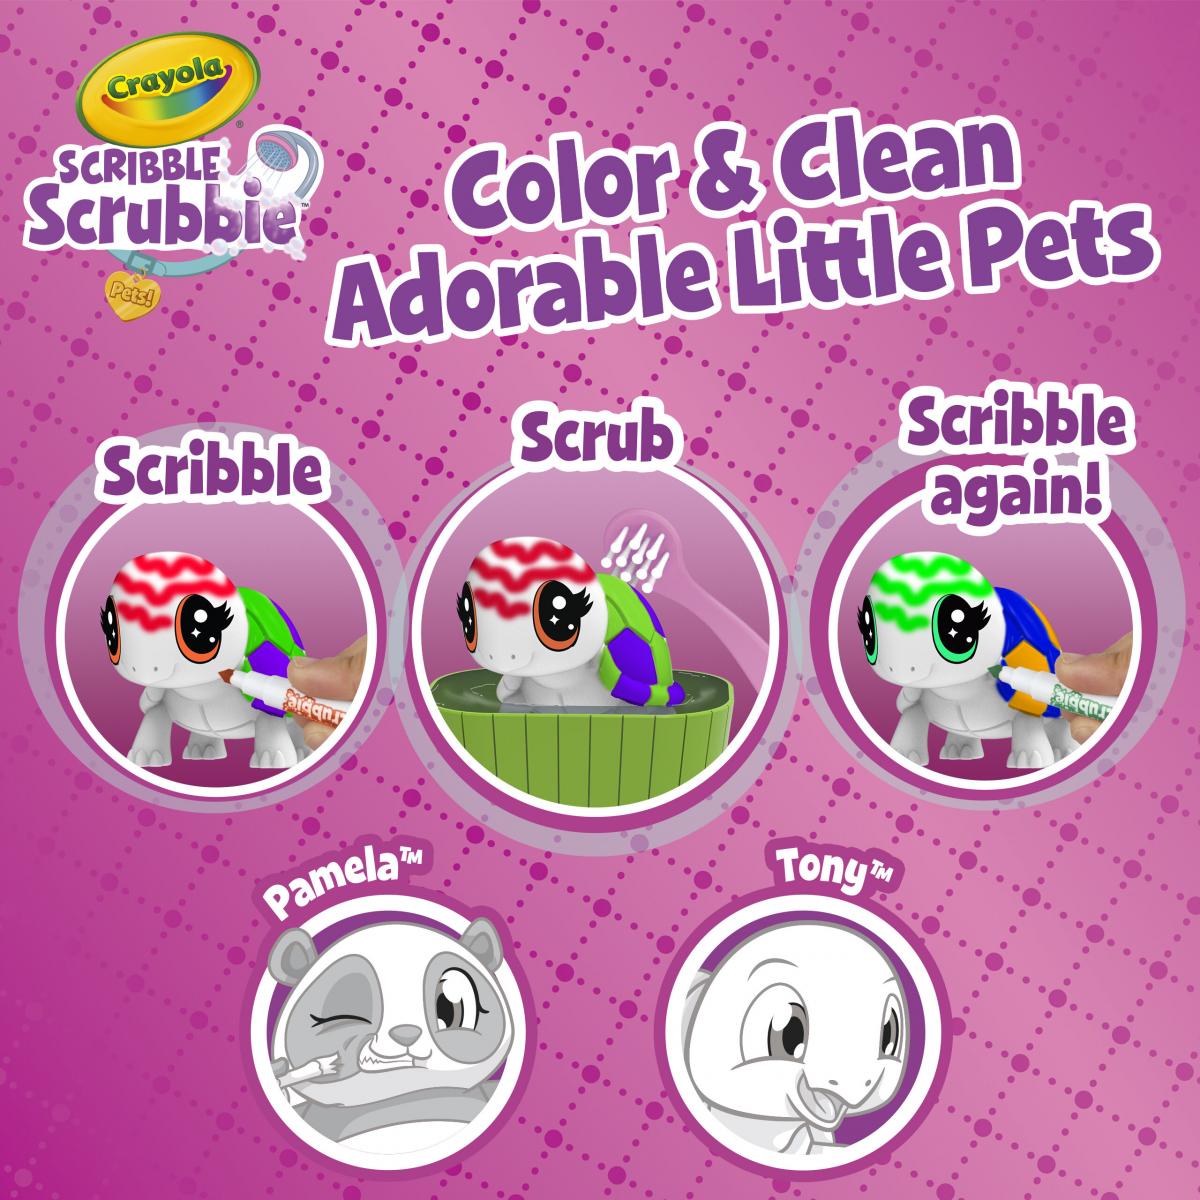 Find the top Crayola Scribble Scrubbie Pets Series 2 135 on Sale